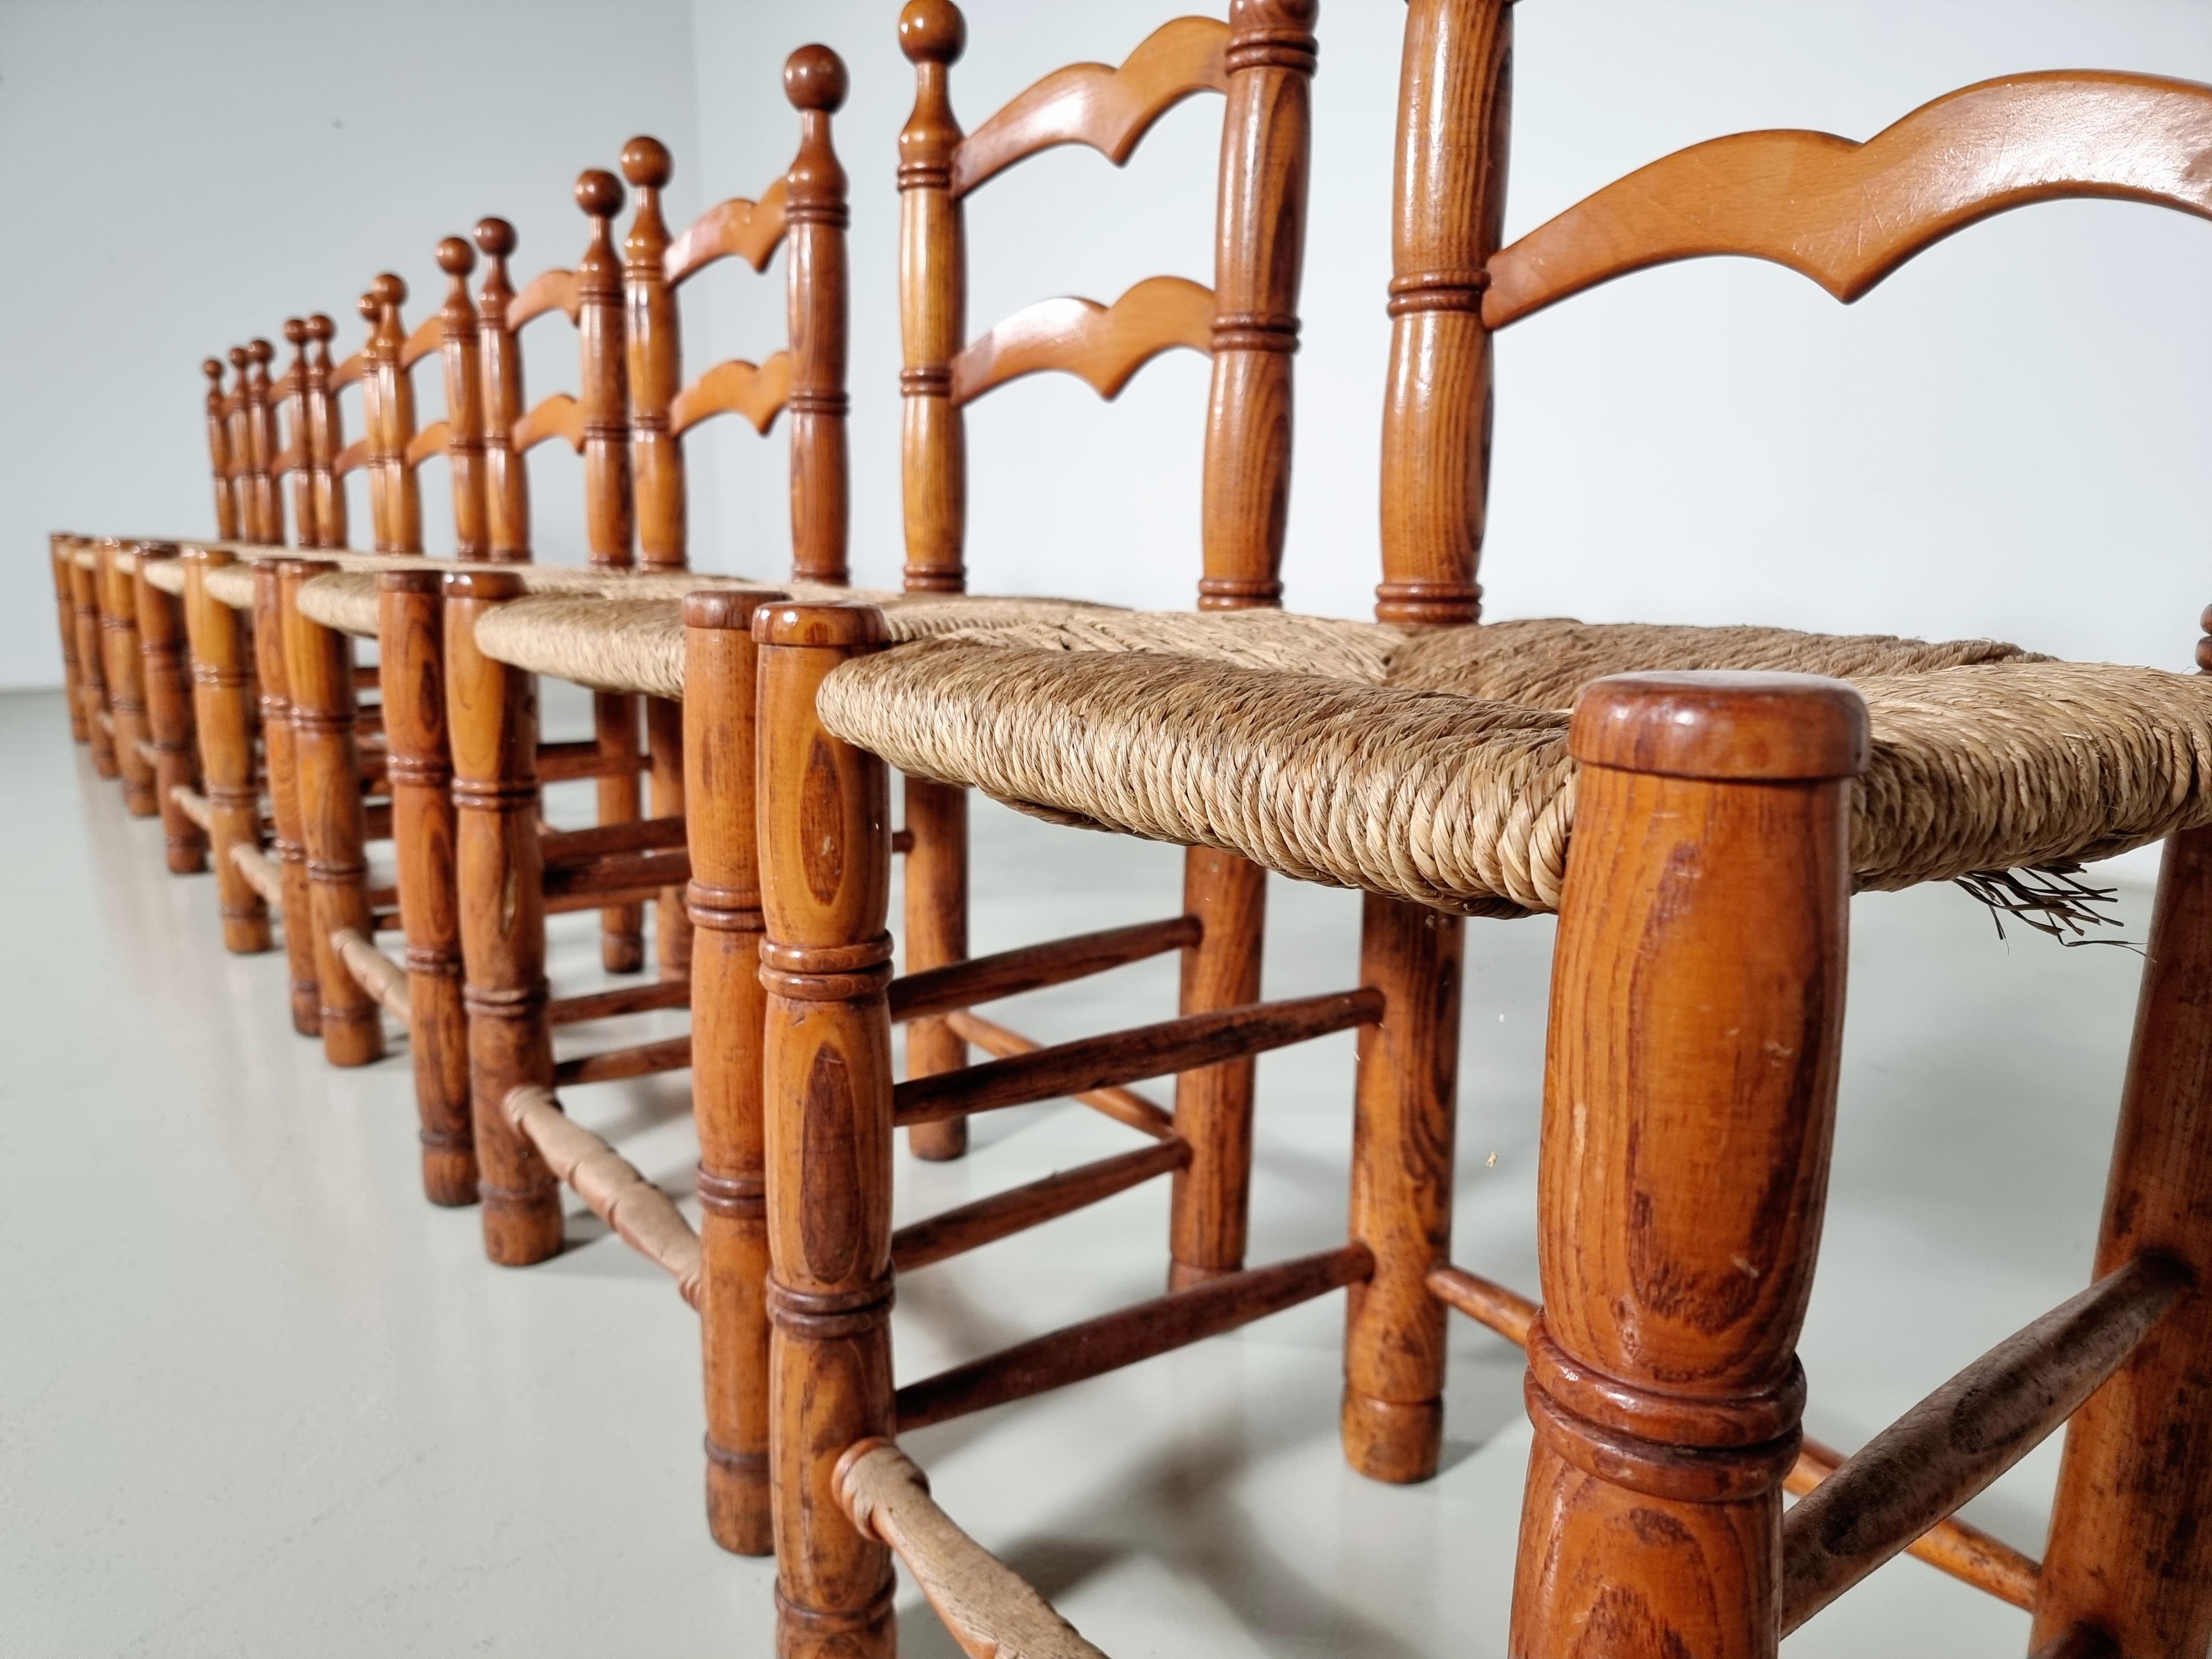 Set of 12 rustic farmer-style dining chairs made of oak with woven rush seats. made in France in the 1970s. The oak frames are in the original light-stained finish. The rush seats are original and in good condition.
 